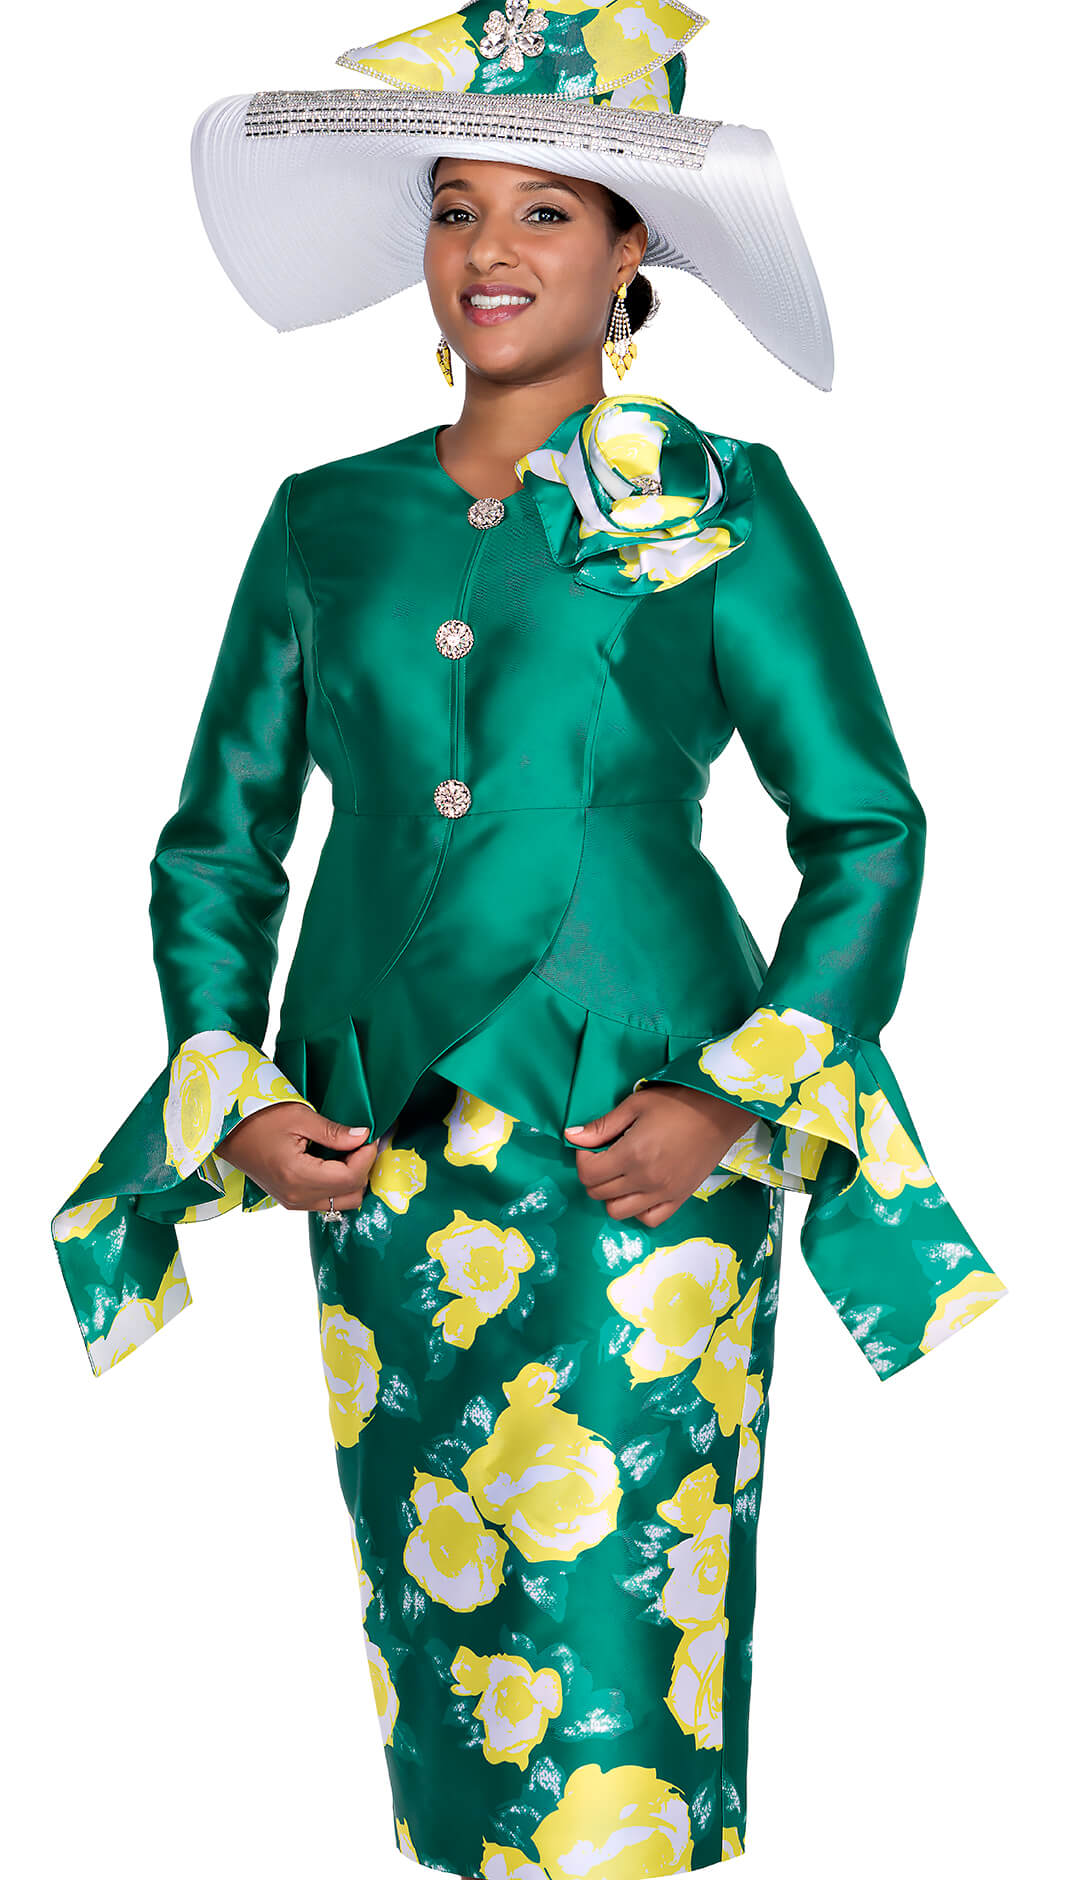 Elite Champagne Church Suit 6061 - Church Suits For Less